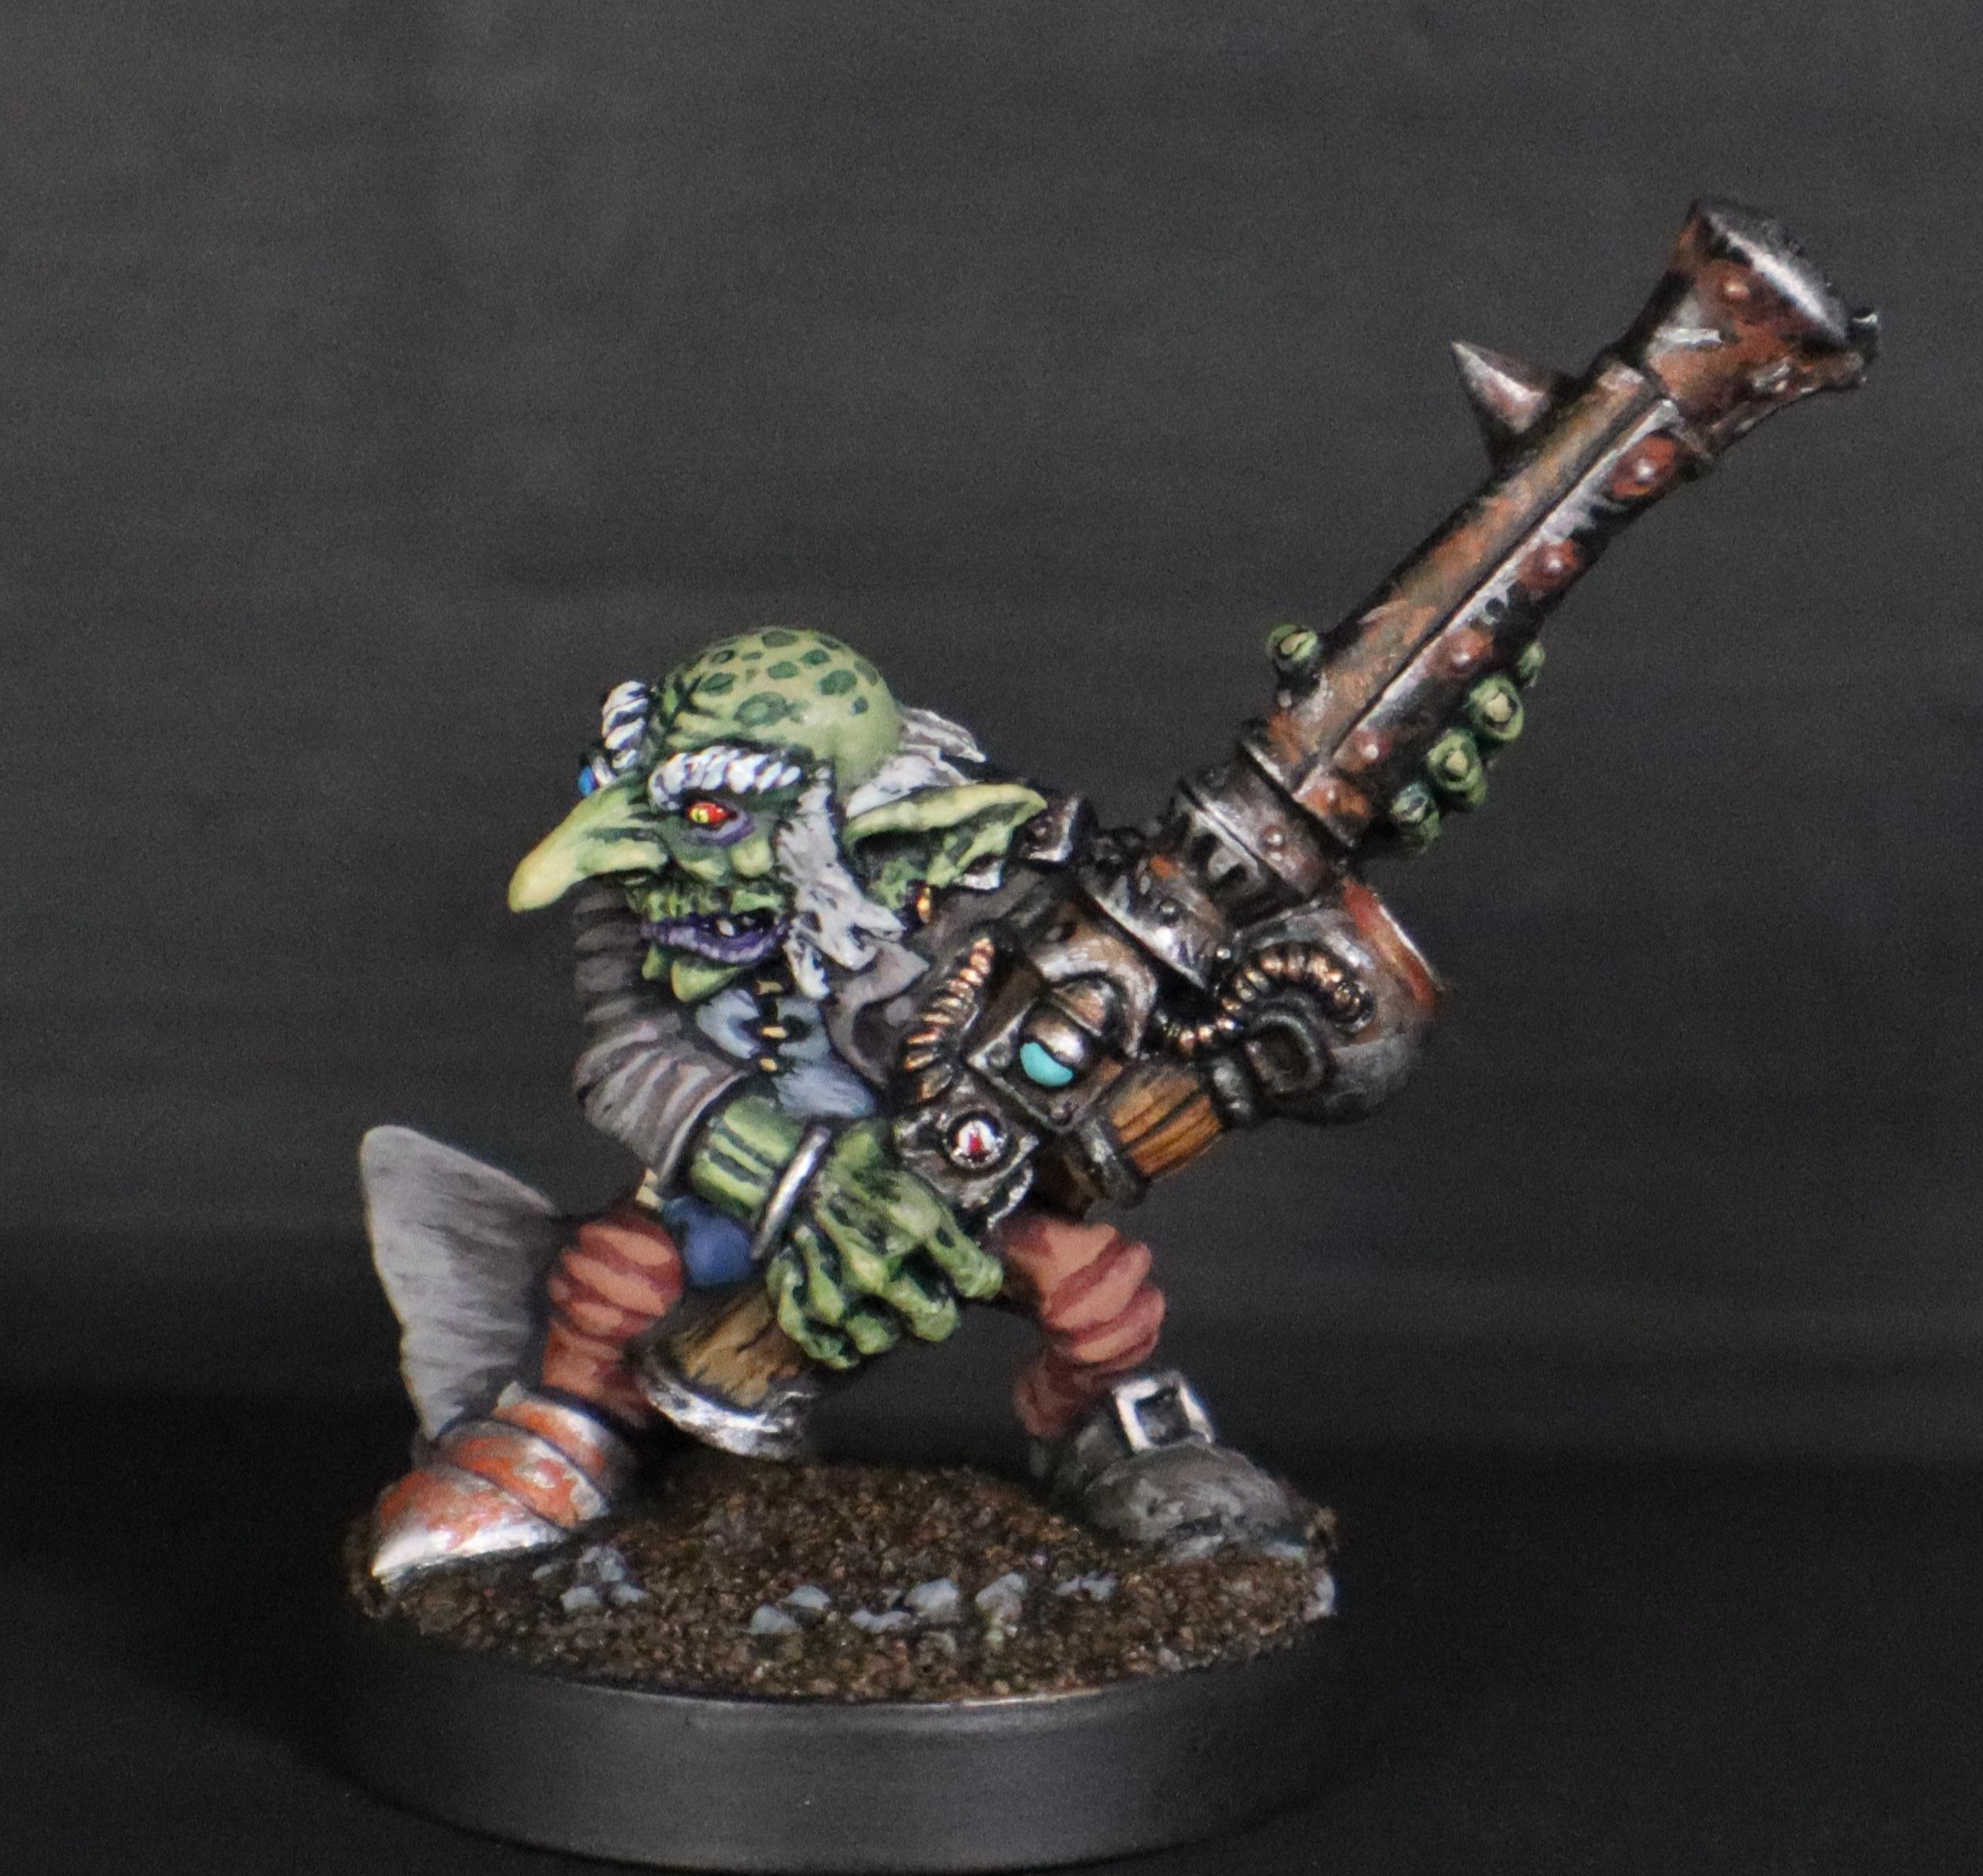 Carbone, Confrontation Painted, Goblin Tracker Champion, Painted Confrontation Miniatures, Pro Painted Confrontation  Minis, Rackham Confrontation, Rackham Painted